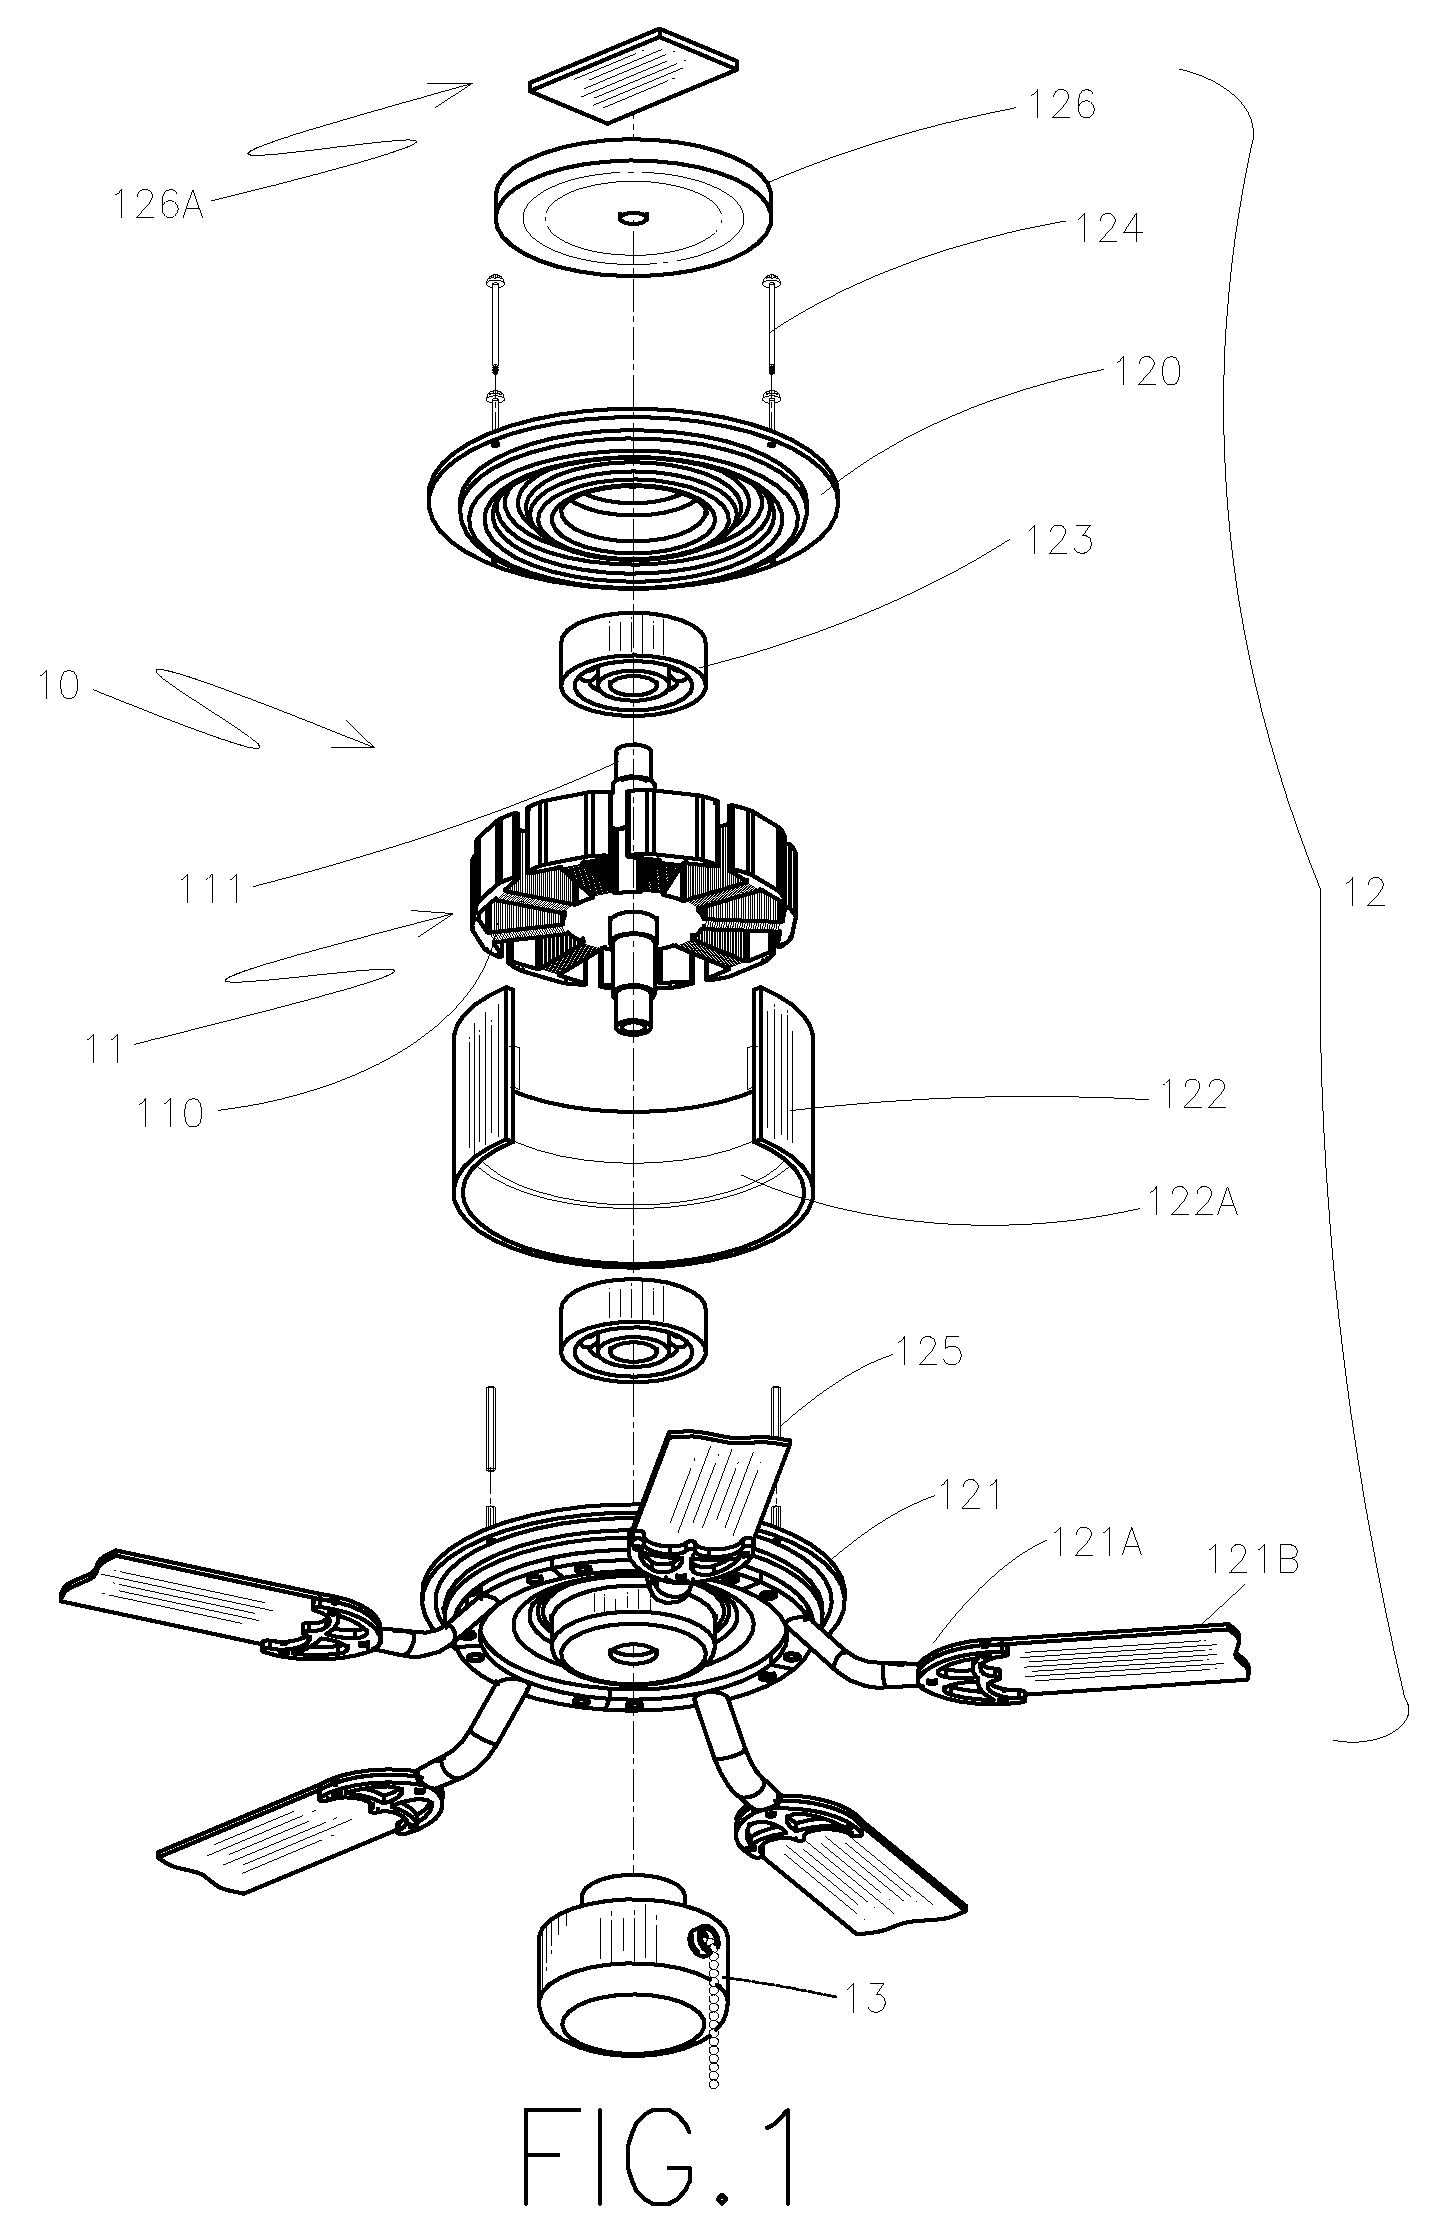 Integrated stator and rotor for a DC brushless ceiling fan motor